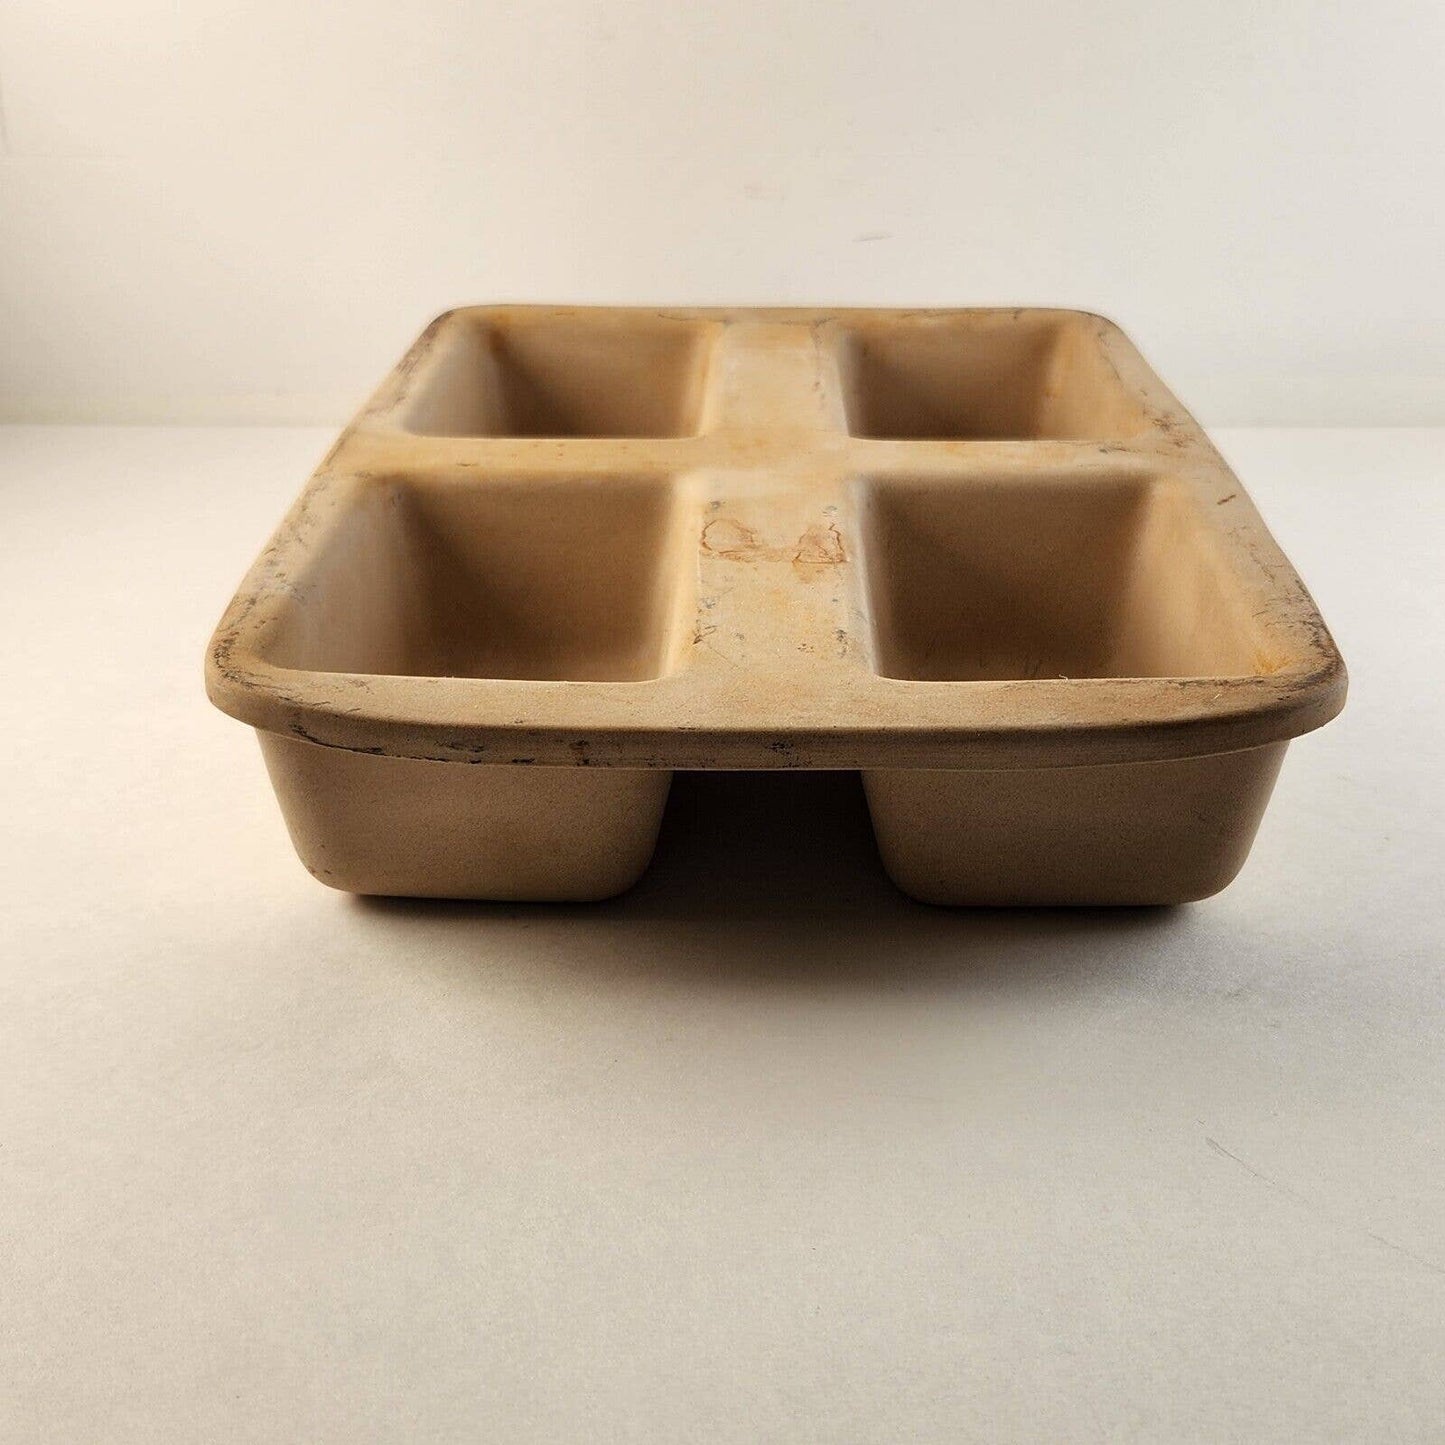  Pampered Chef Stoneware Mini Loaf Pan: Home & Kitchen